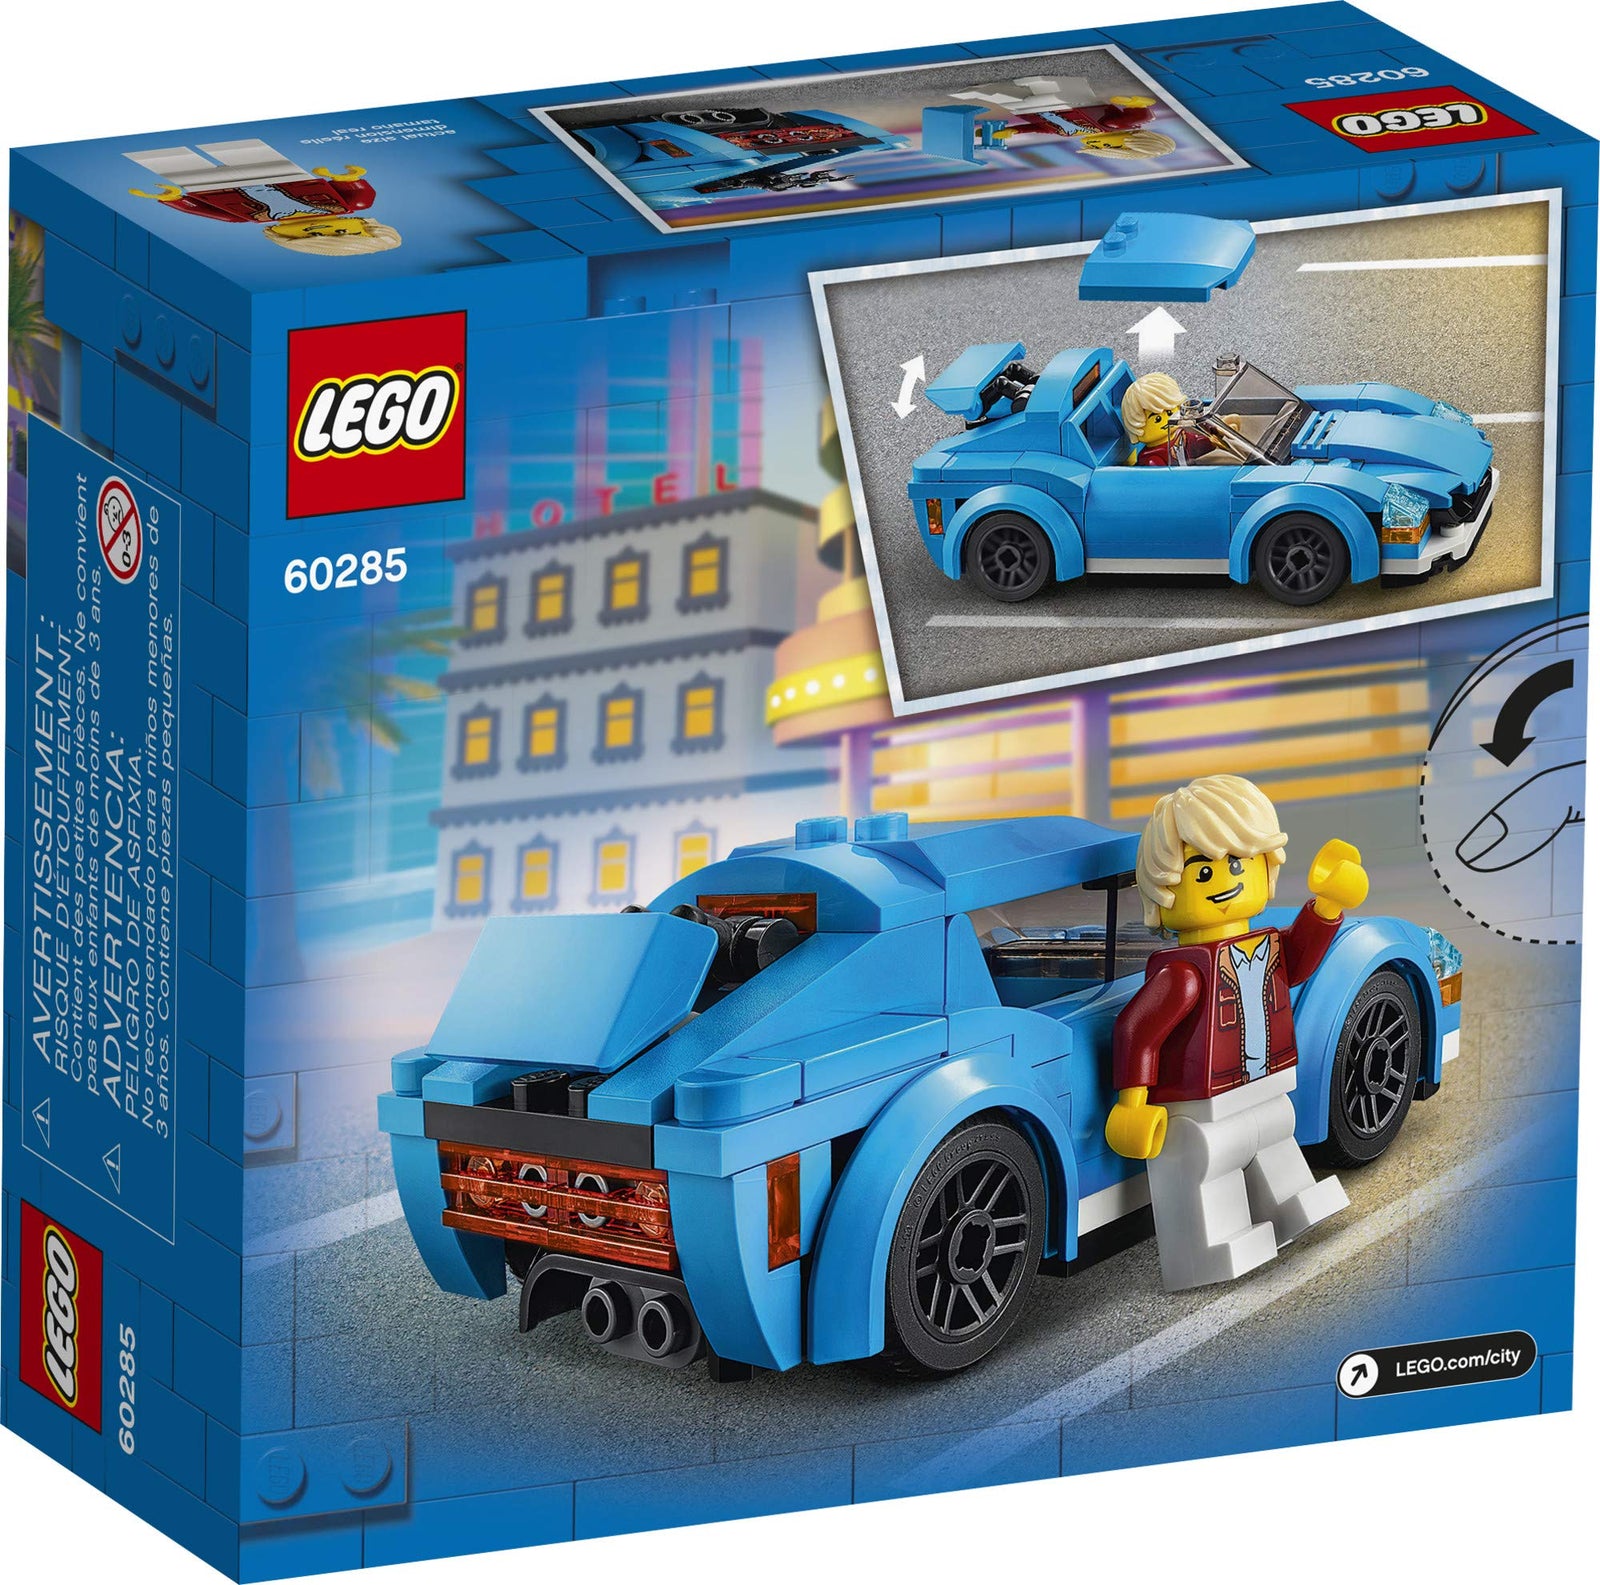 LEGO City Sports Car 60285 Building Kit; Playset for Kids, New 2021 (89 Pieces)